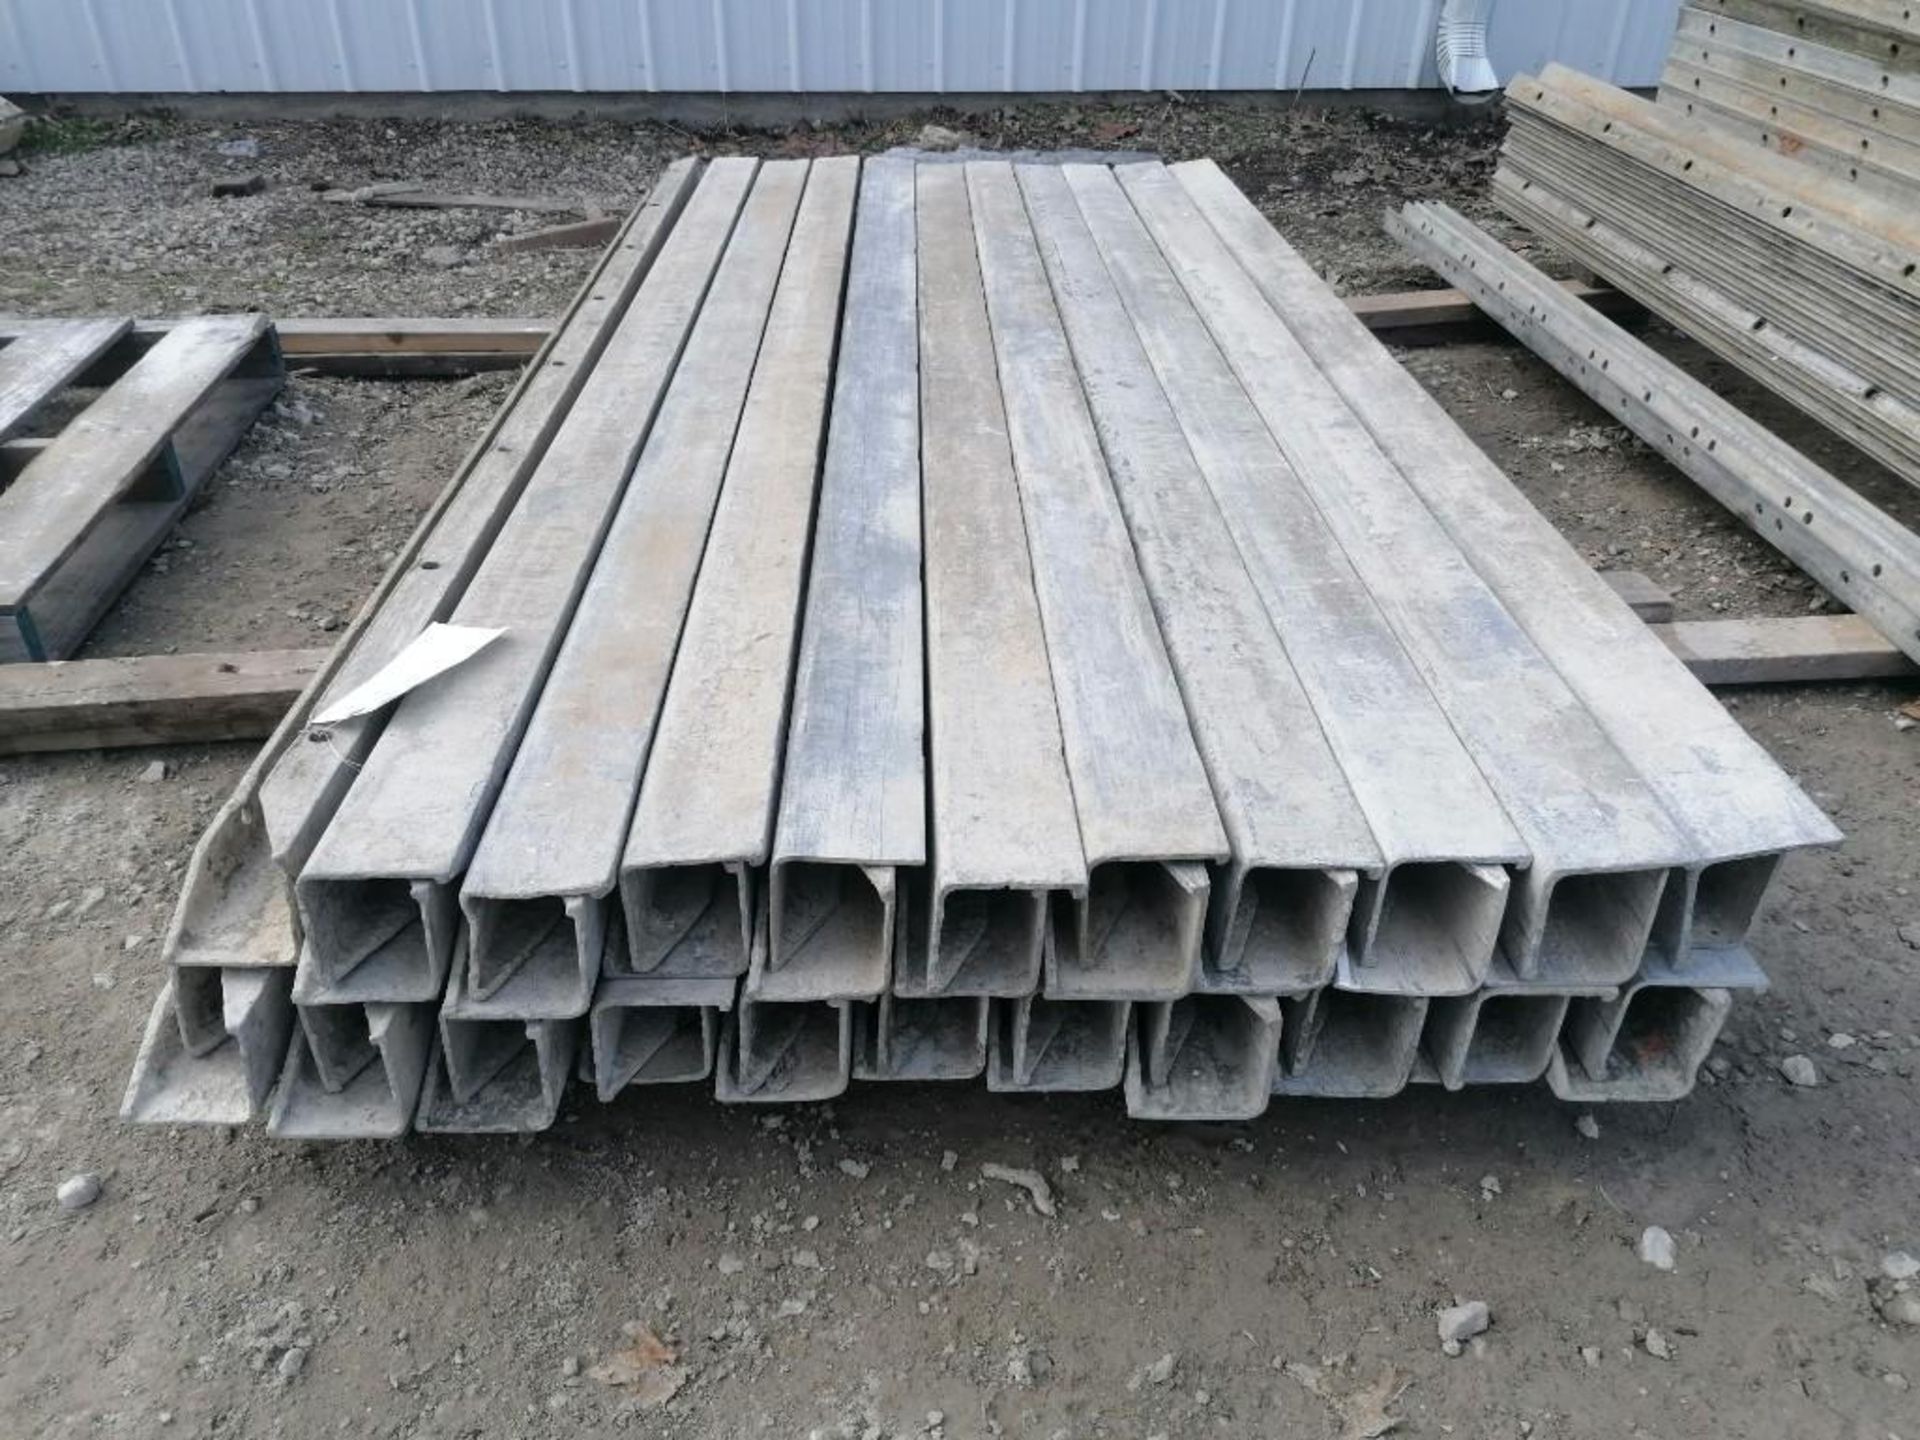 (43) 4" x 4" x 8' Full ISC Wall-Ties Smooth Aluminum Concrete Forms 6-12 Hole Pattern. Located in